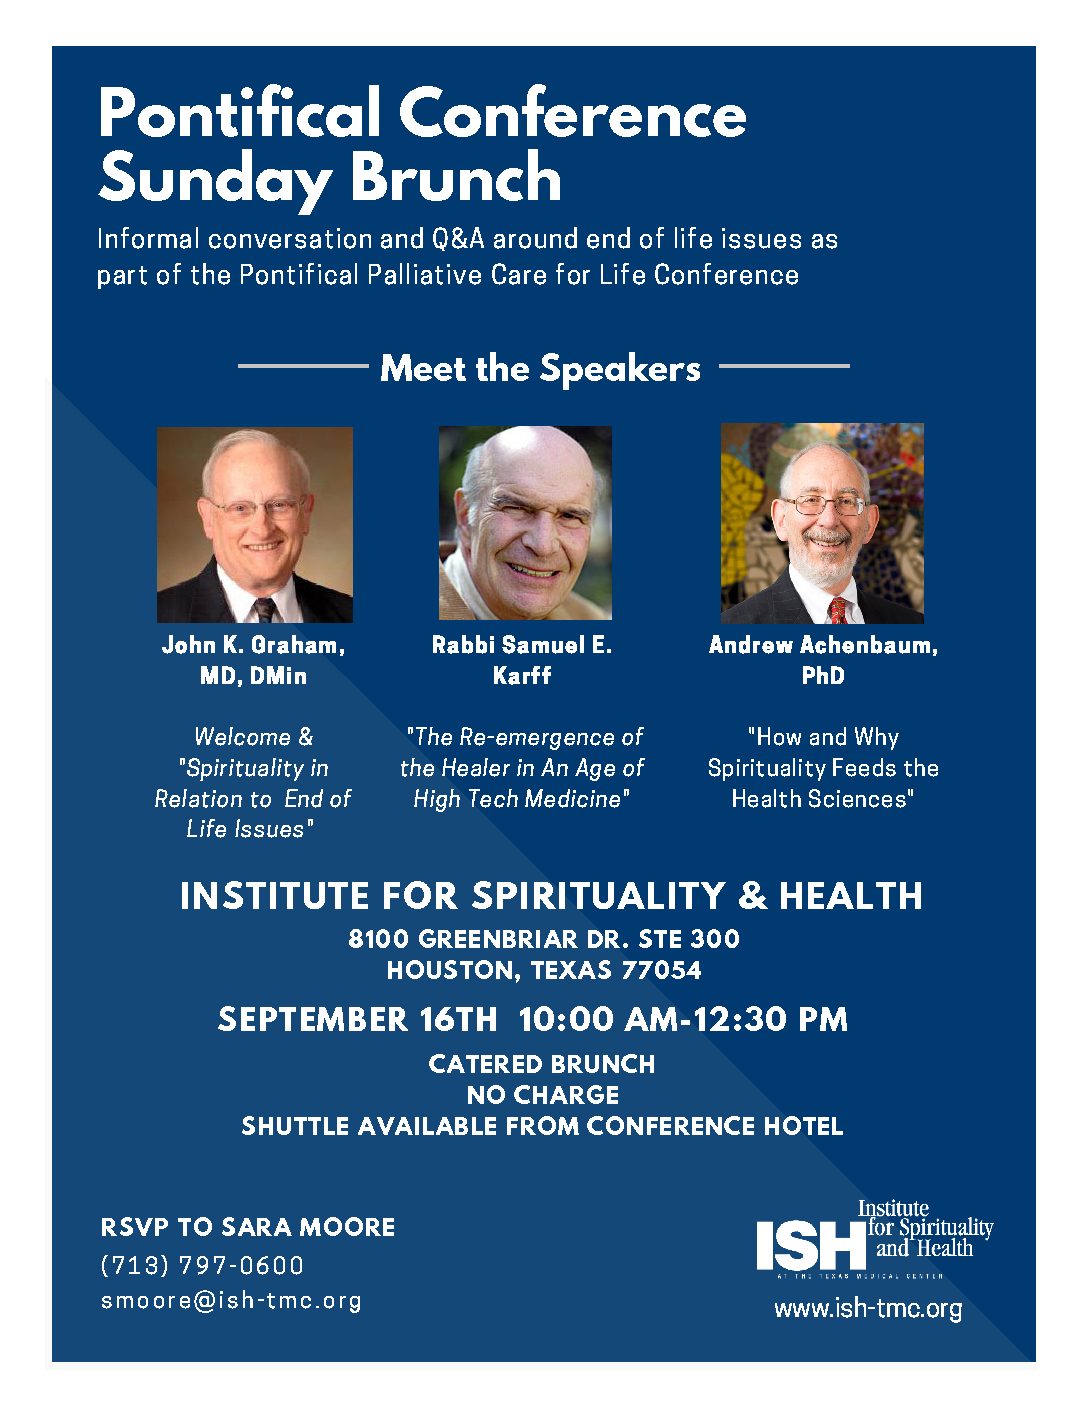 Institute for Spirituality & Health Pontifical Conference Sunday Brunch - Sept. 16